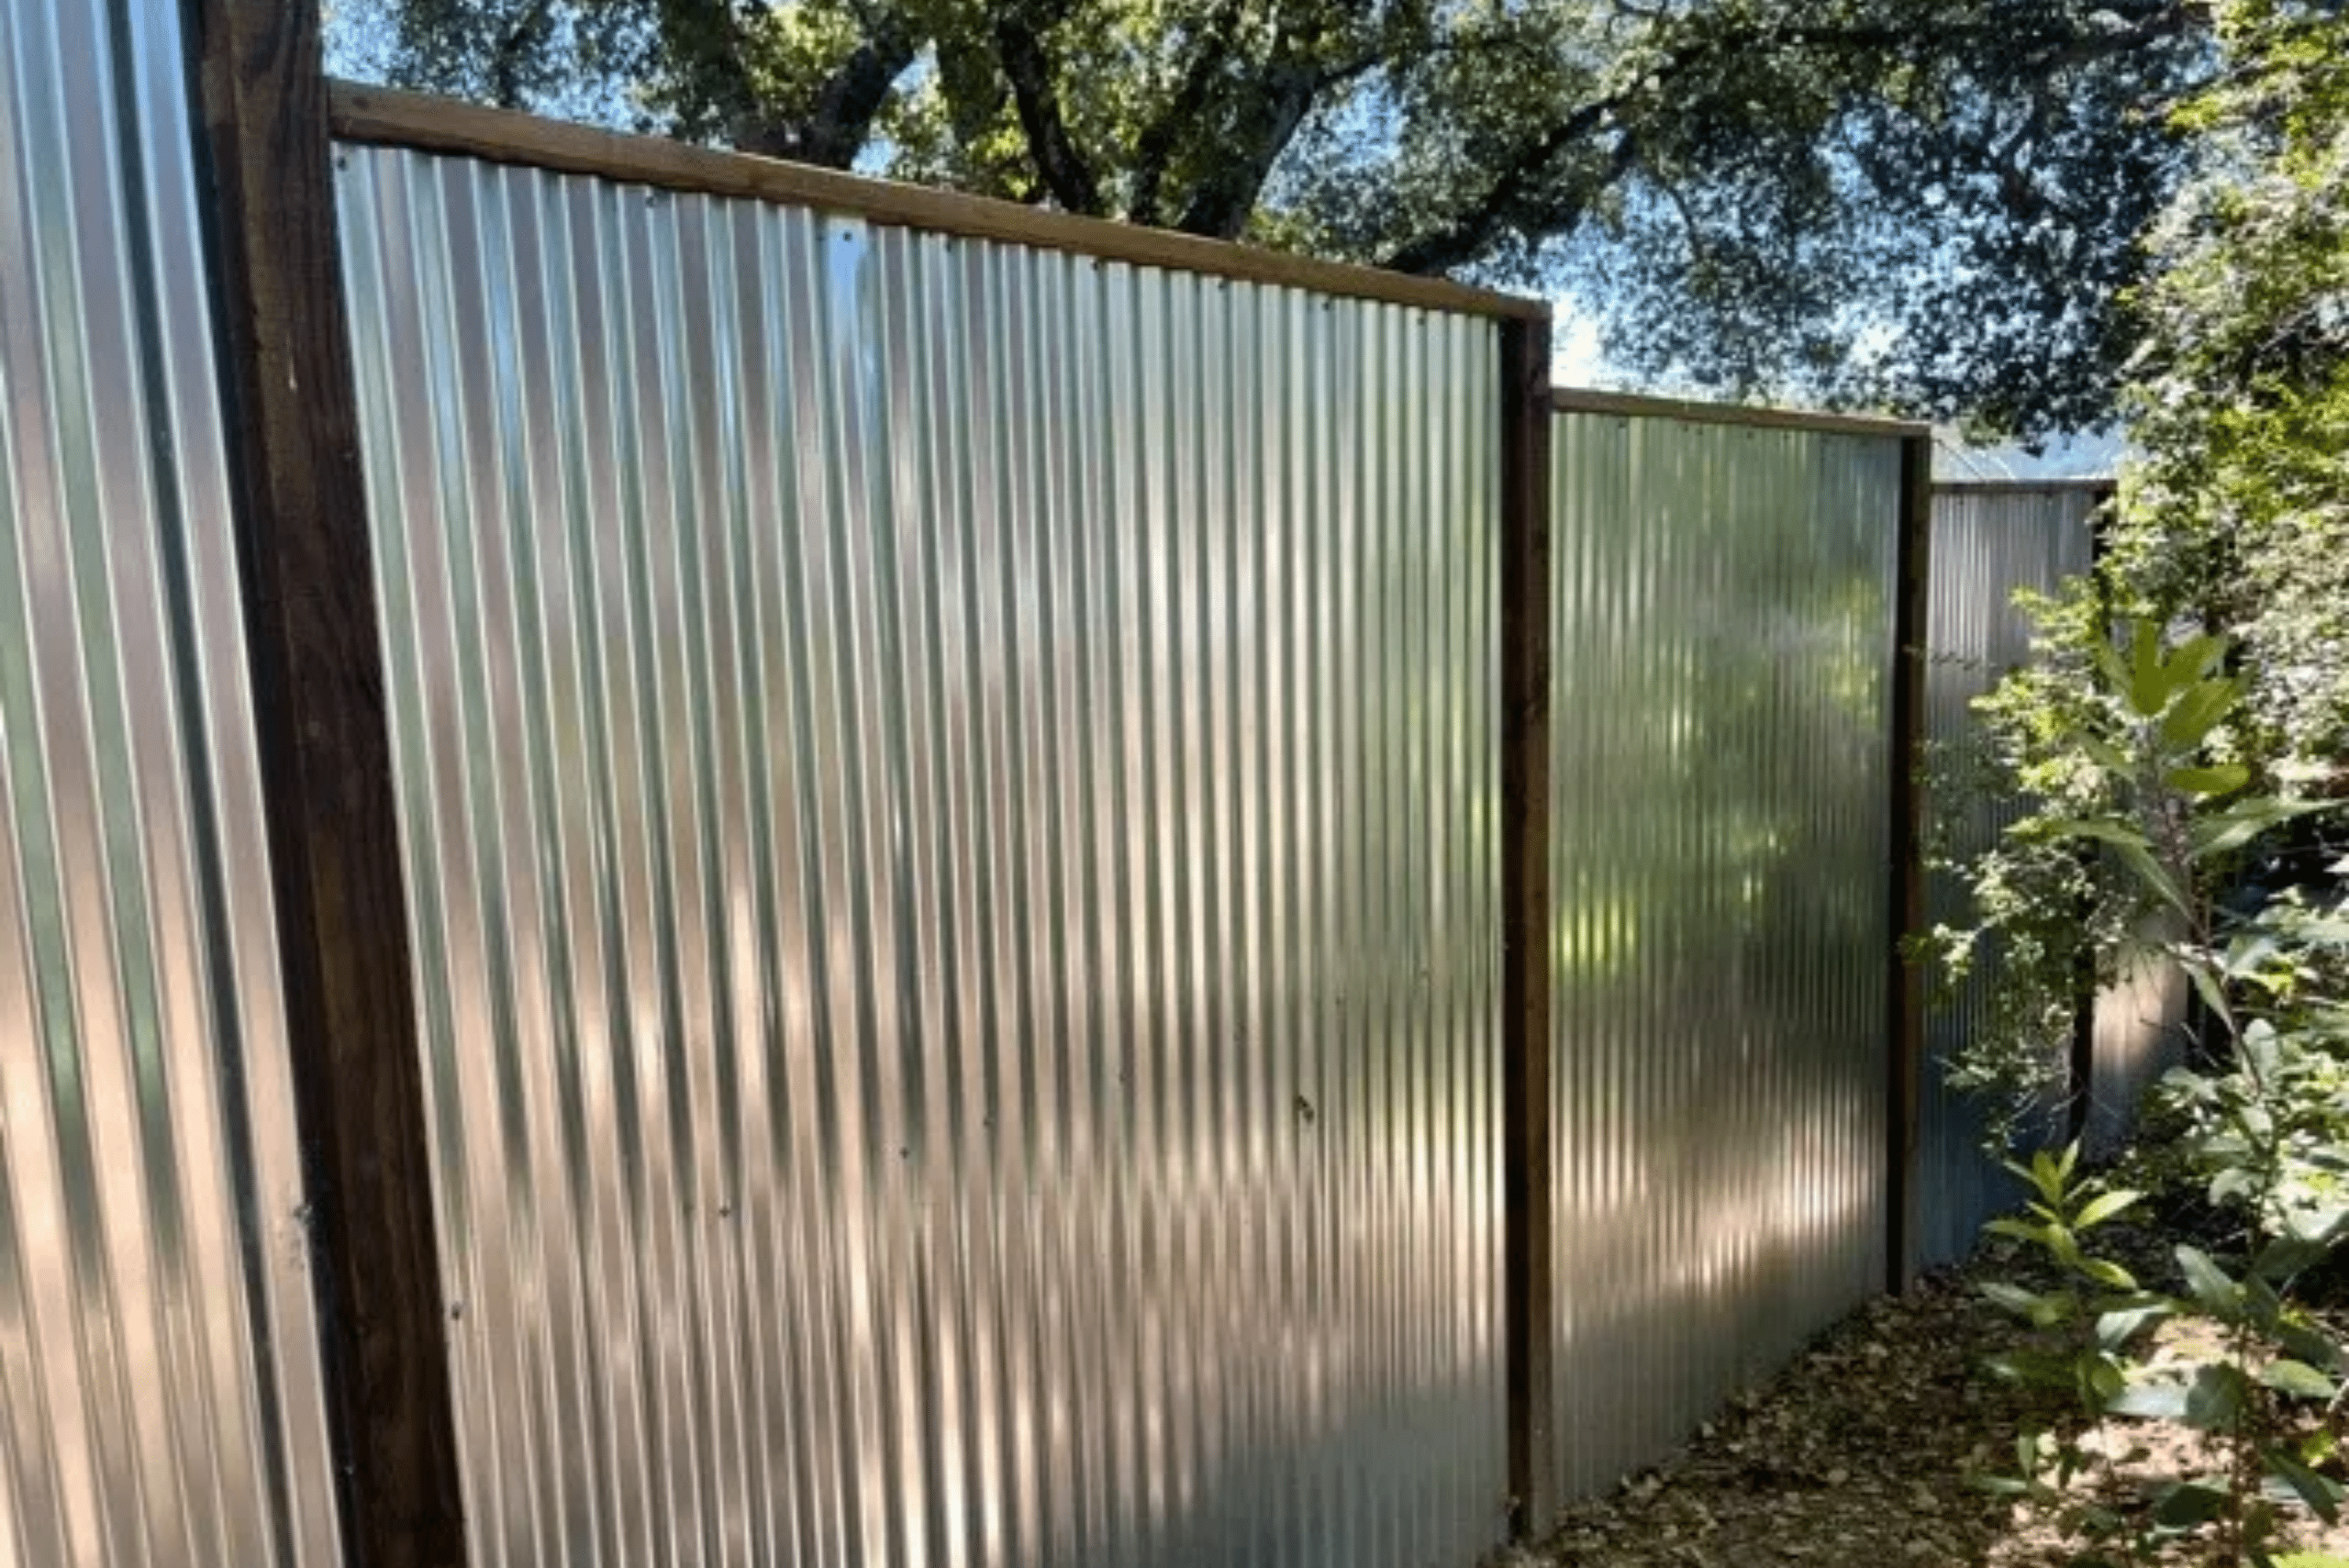 Corrugated fencing with black frame.